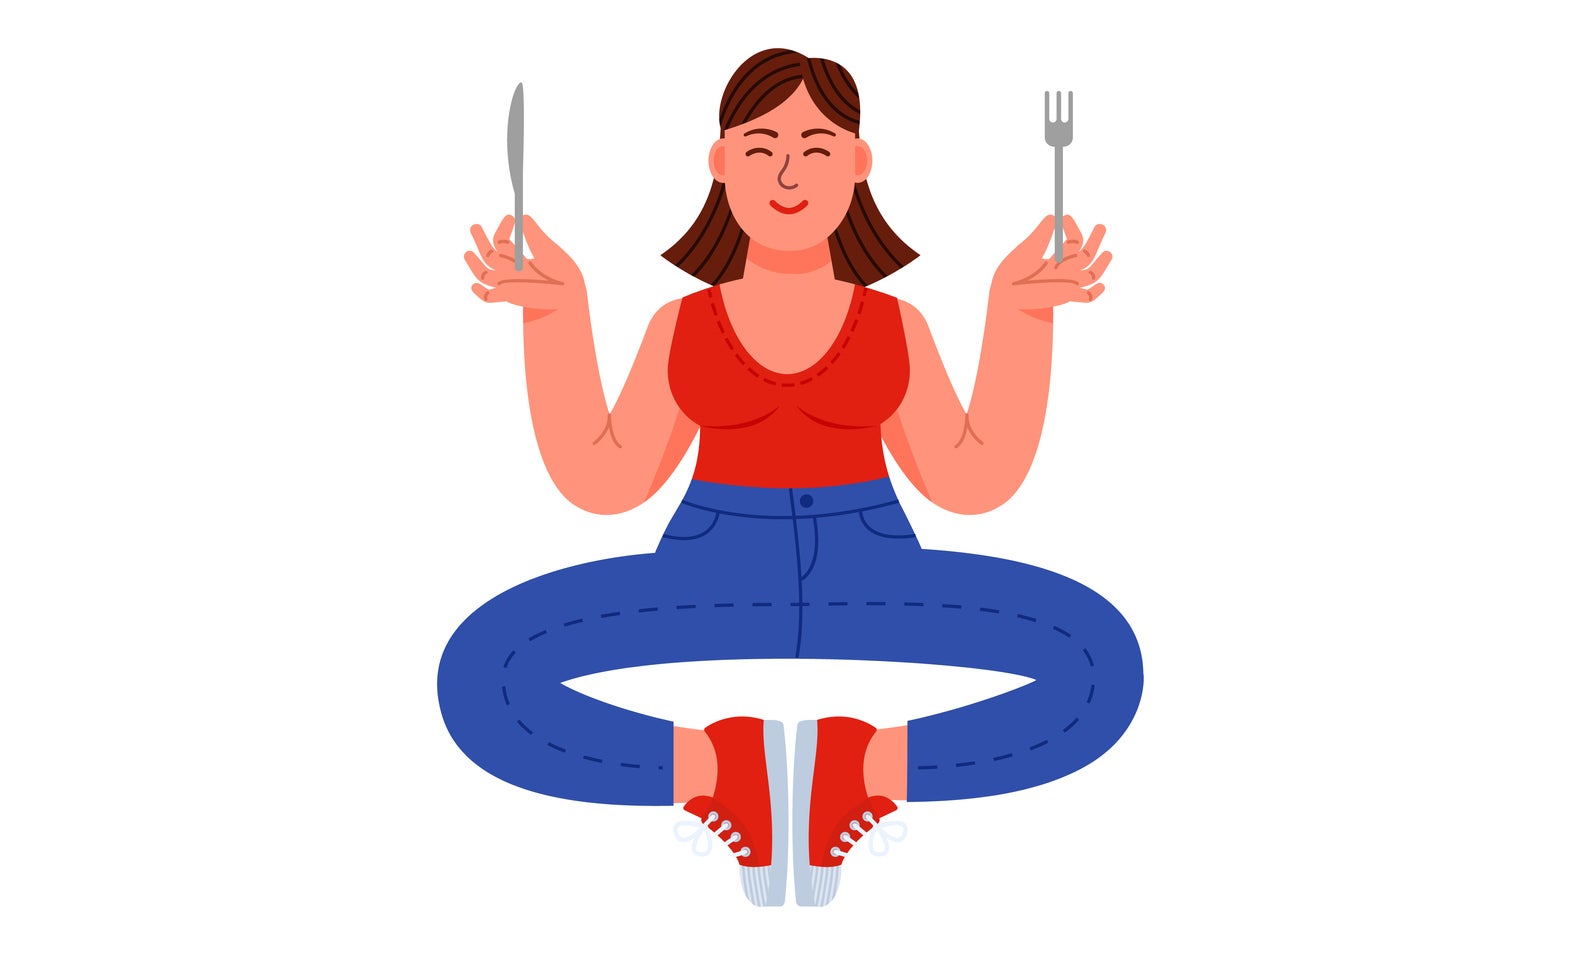 Illustration of a woman sitting cross-legged holding a knife and fork, looking content